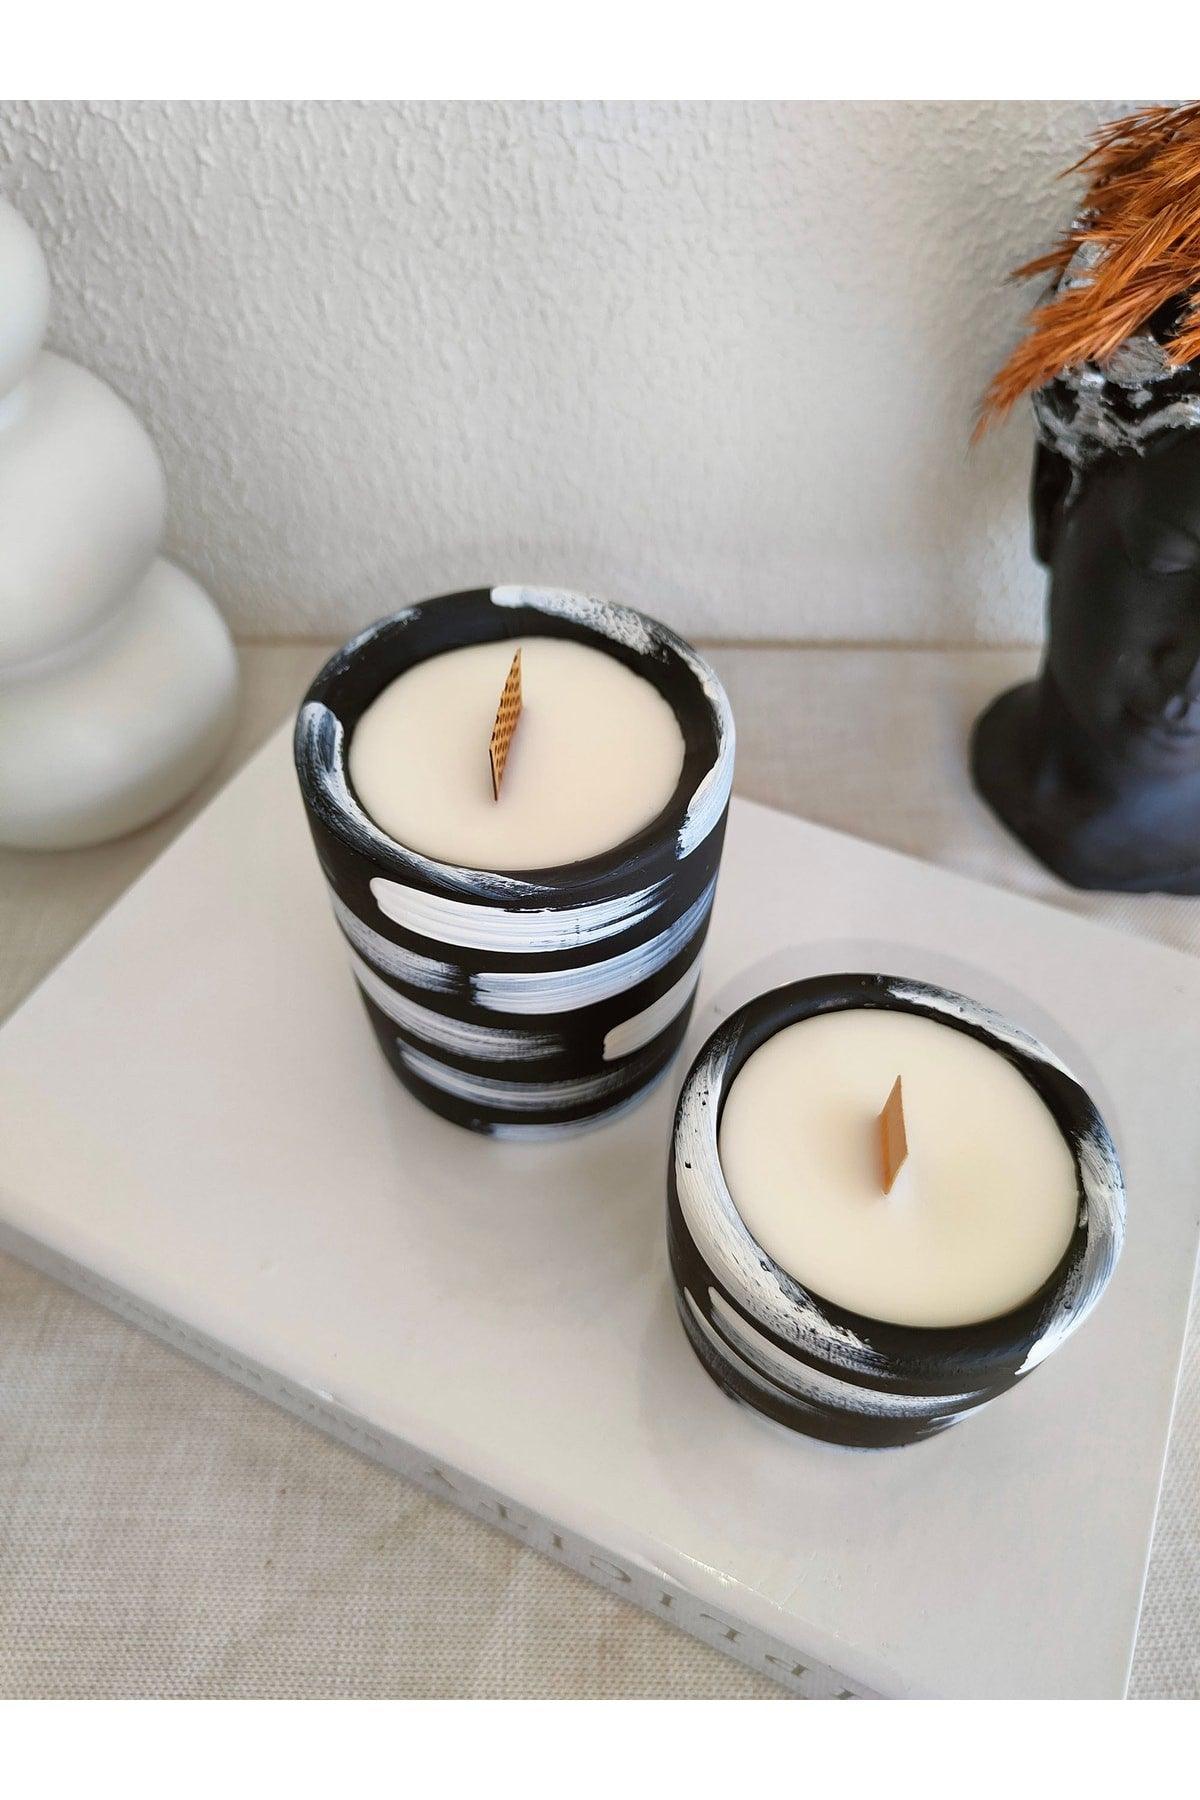 Decorative 100% Soy Wax Sandal & Amber Scented Bamboo Wick Aromatherapy Candle Black and White Set of 2 - Swordslife